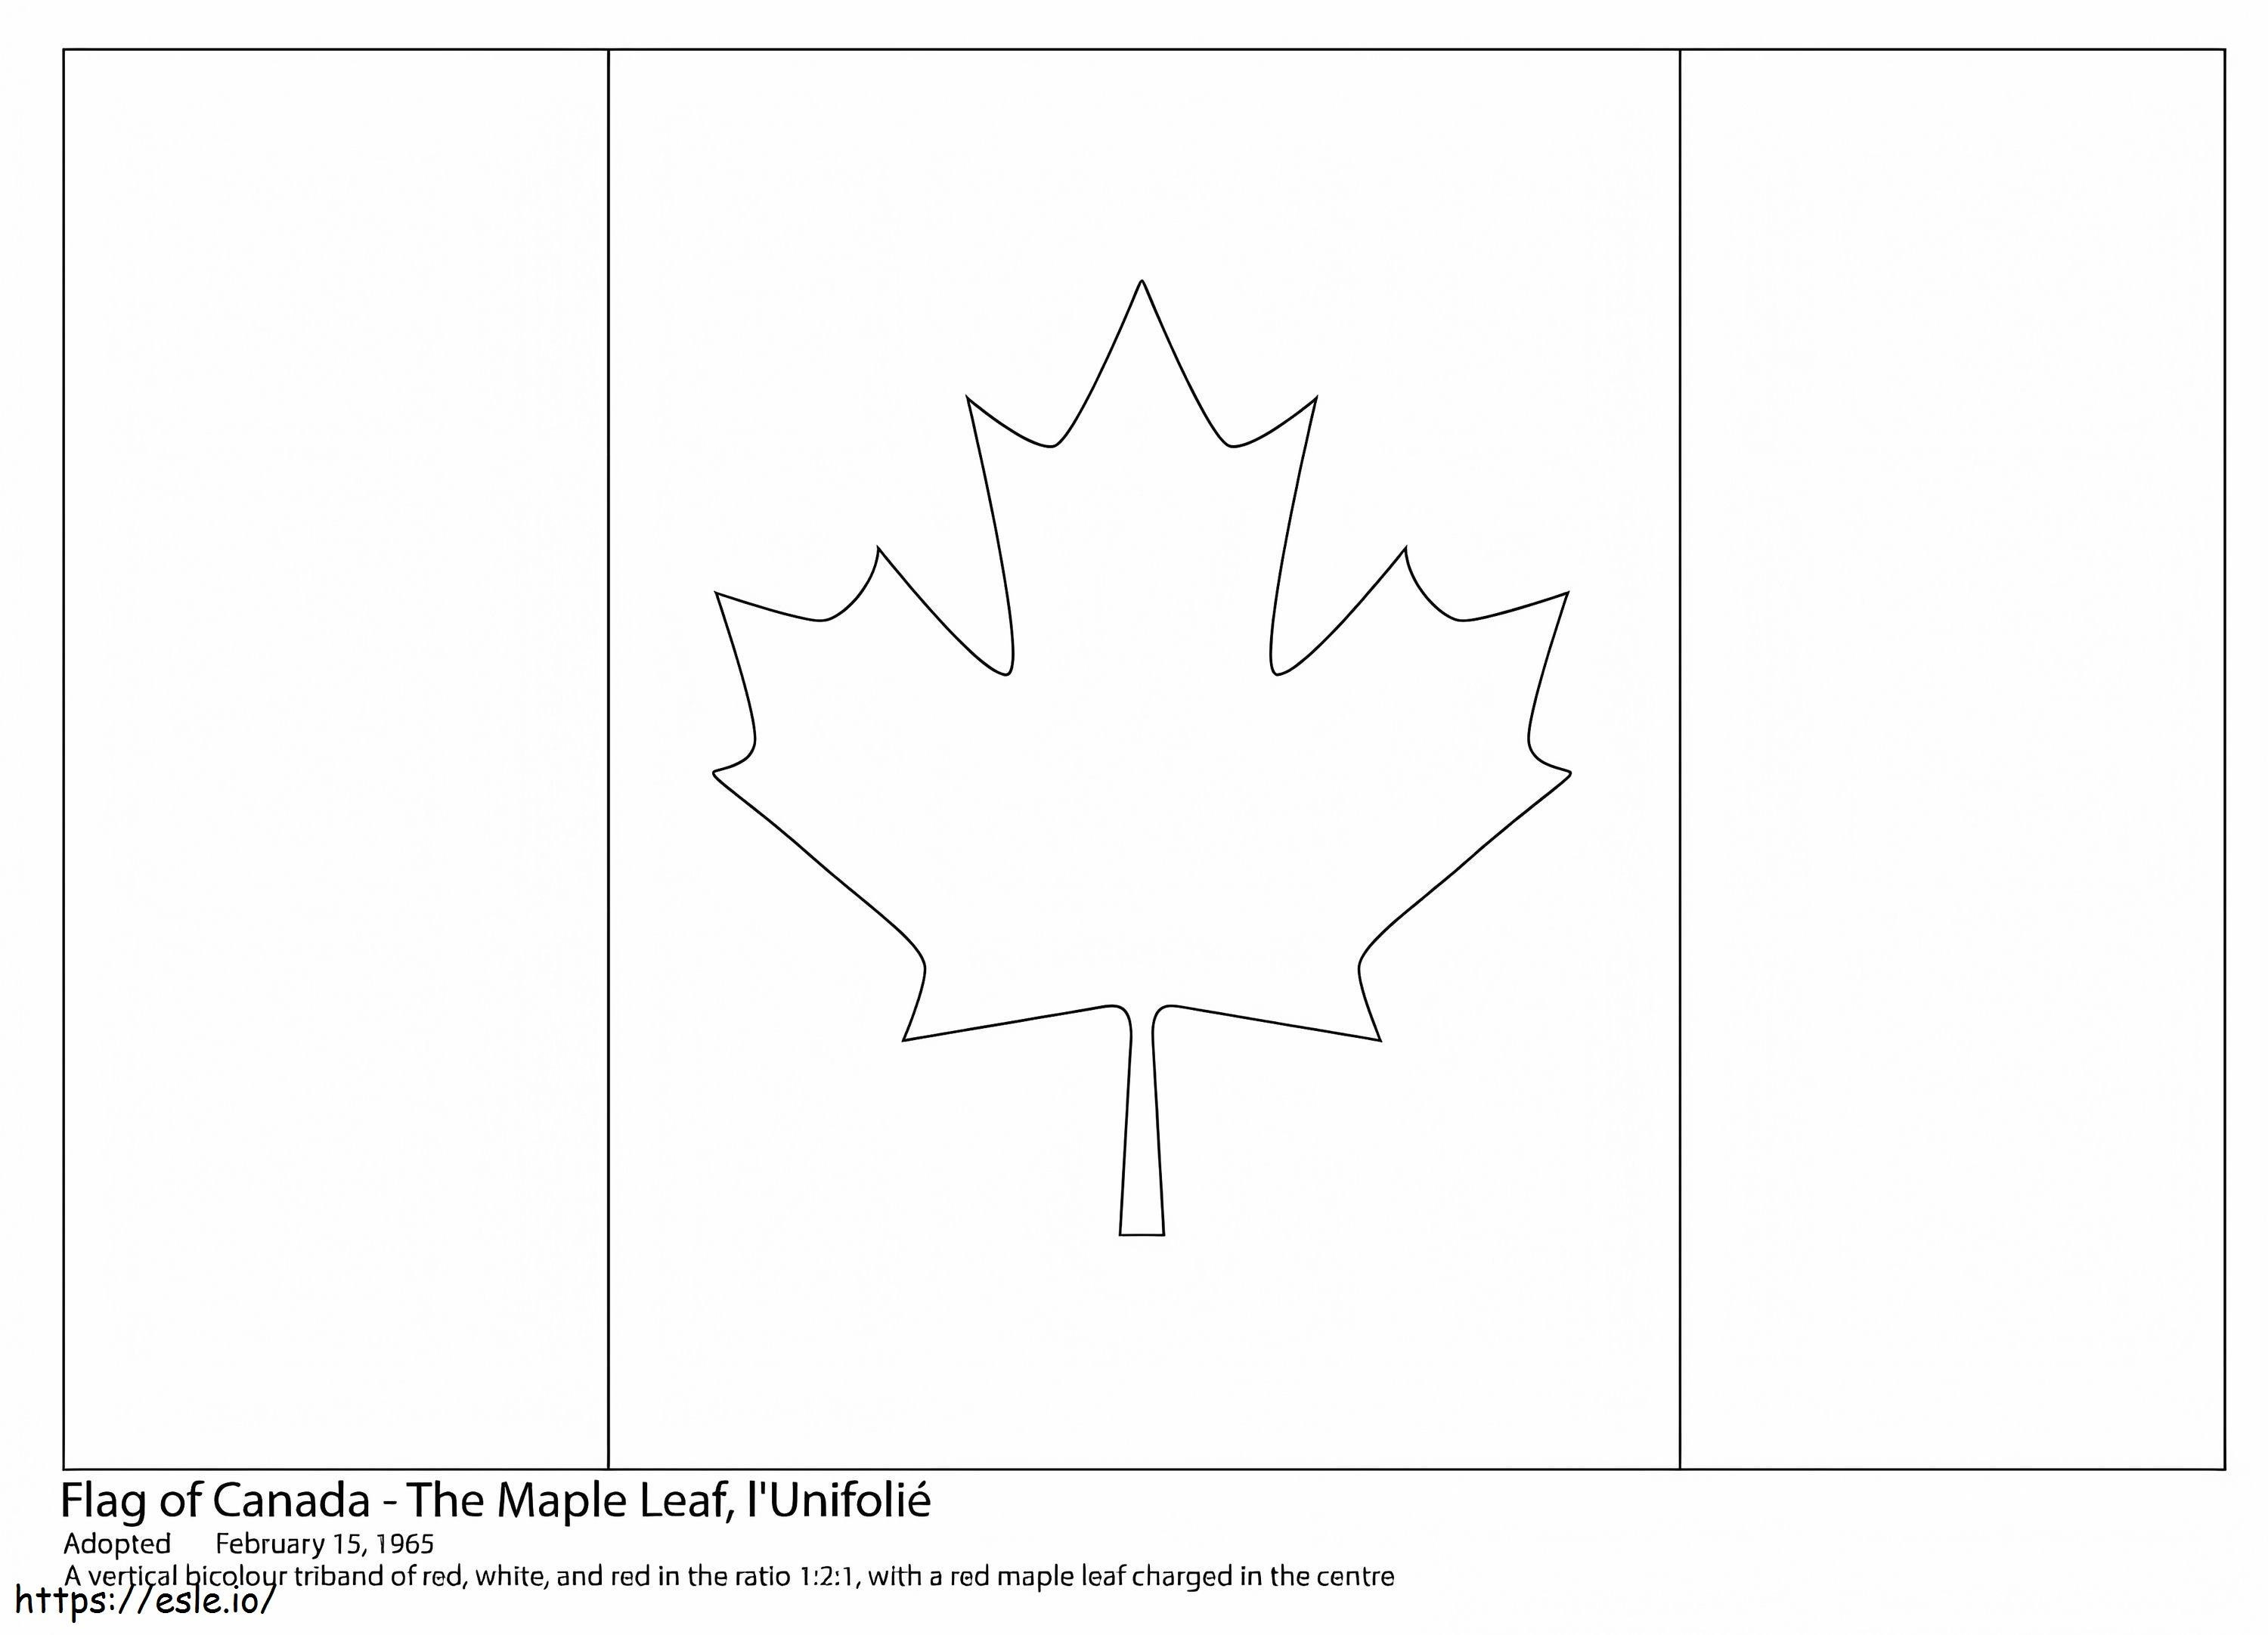 Canadian Flag 8 coloring page